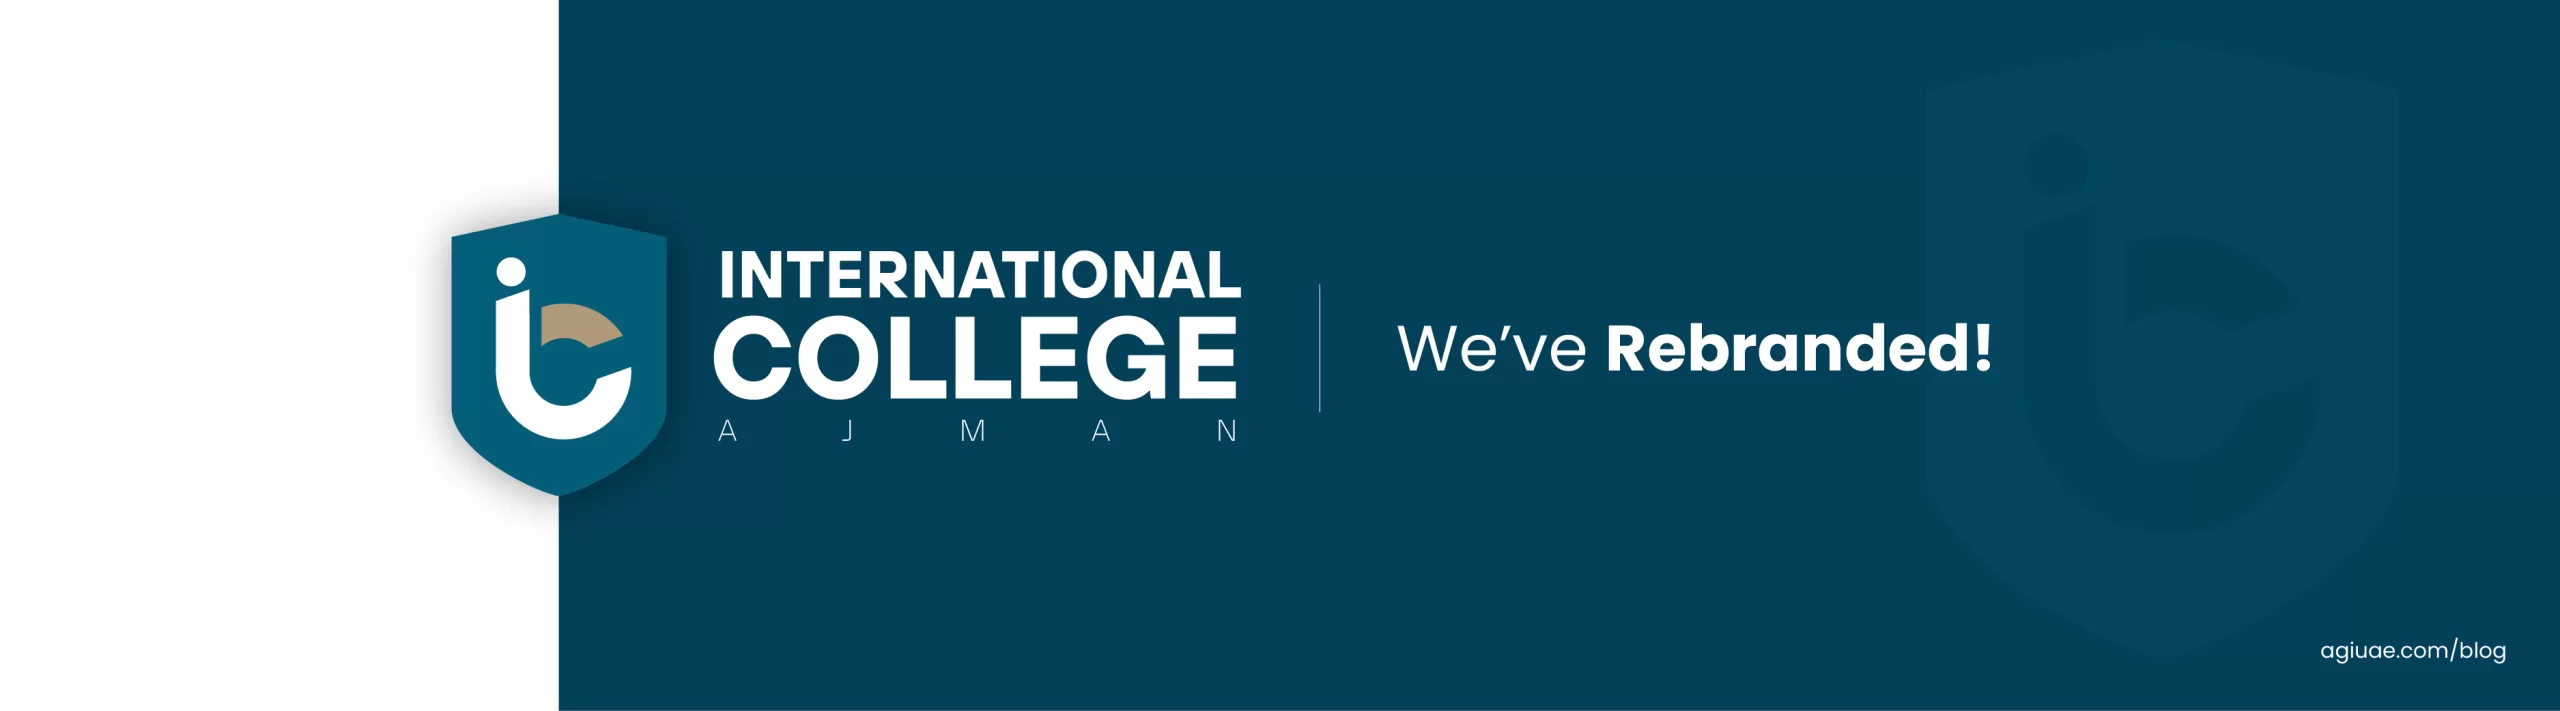 Ajman’s renowned higher educational institution - International College of Law Business Administration and Technology got a branding facelift.